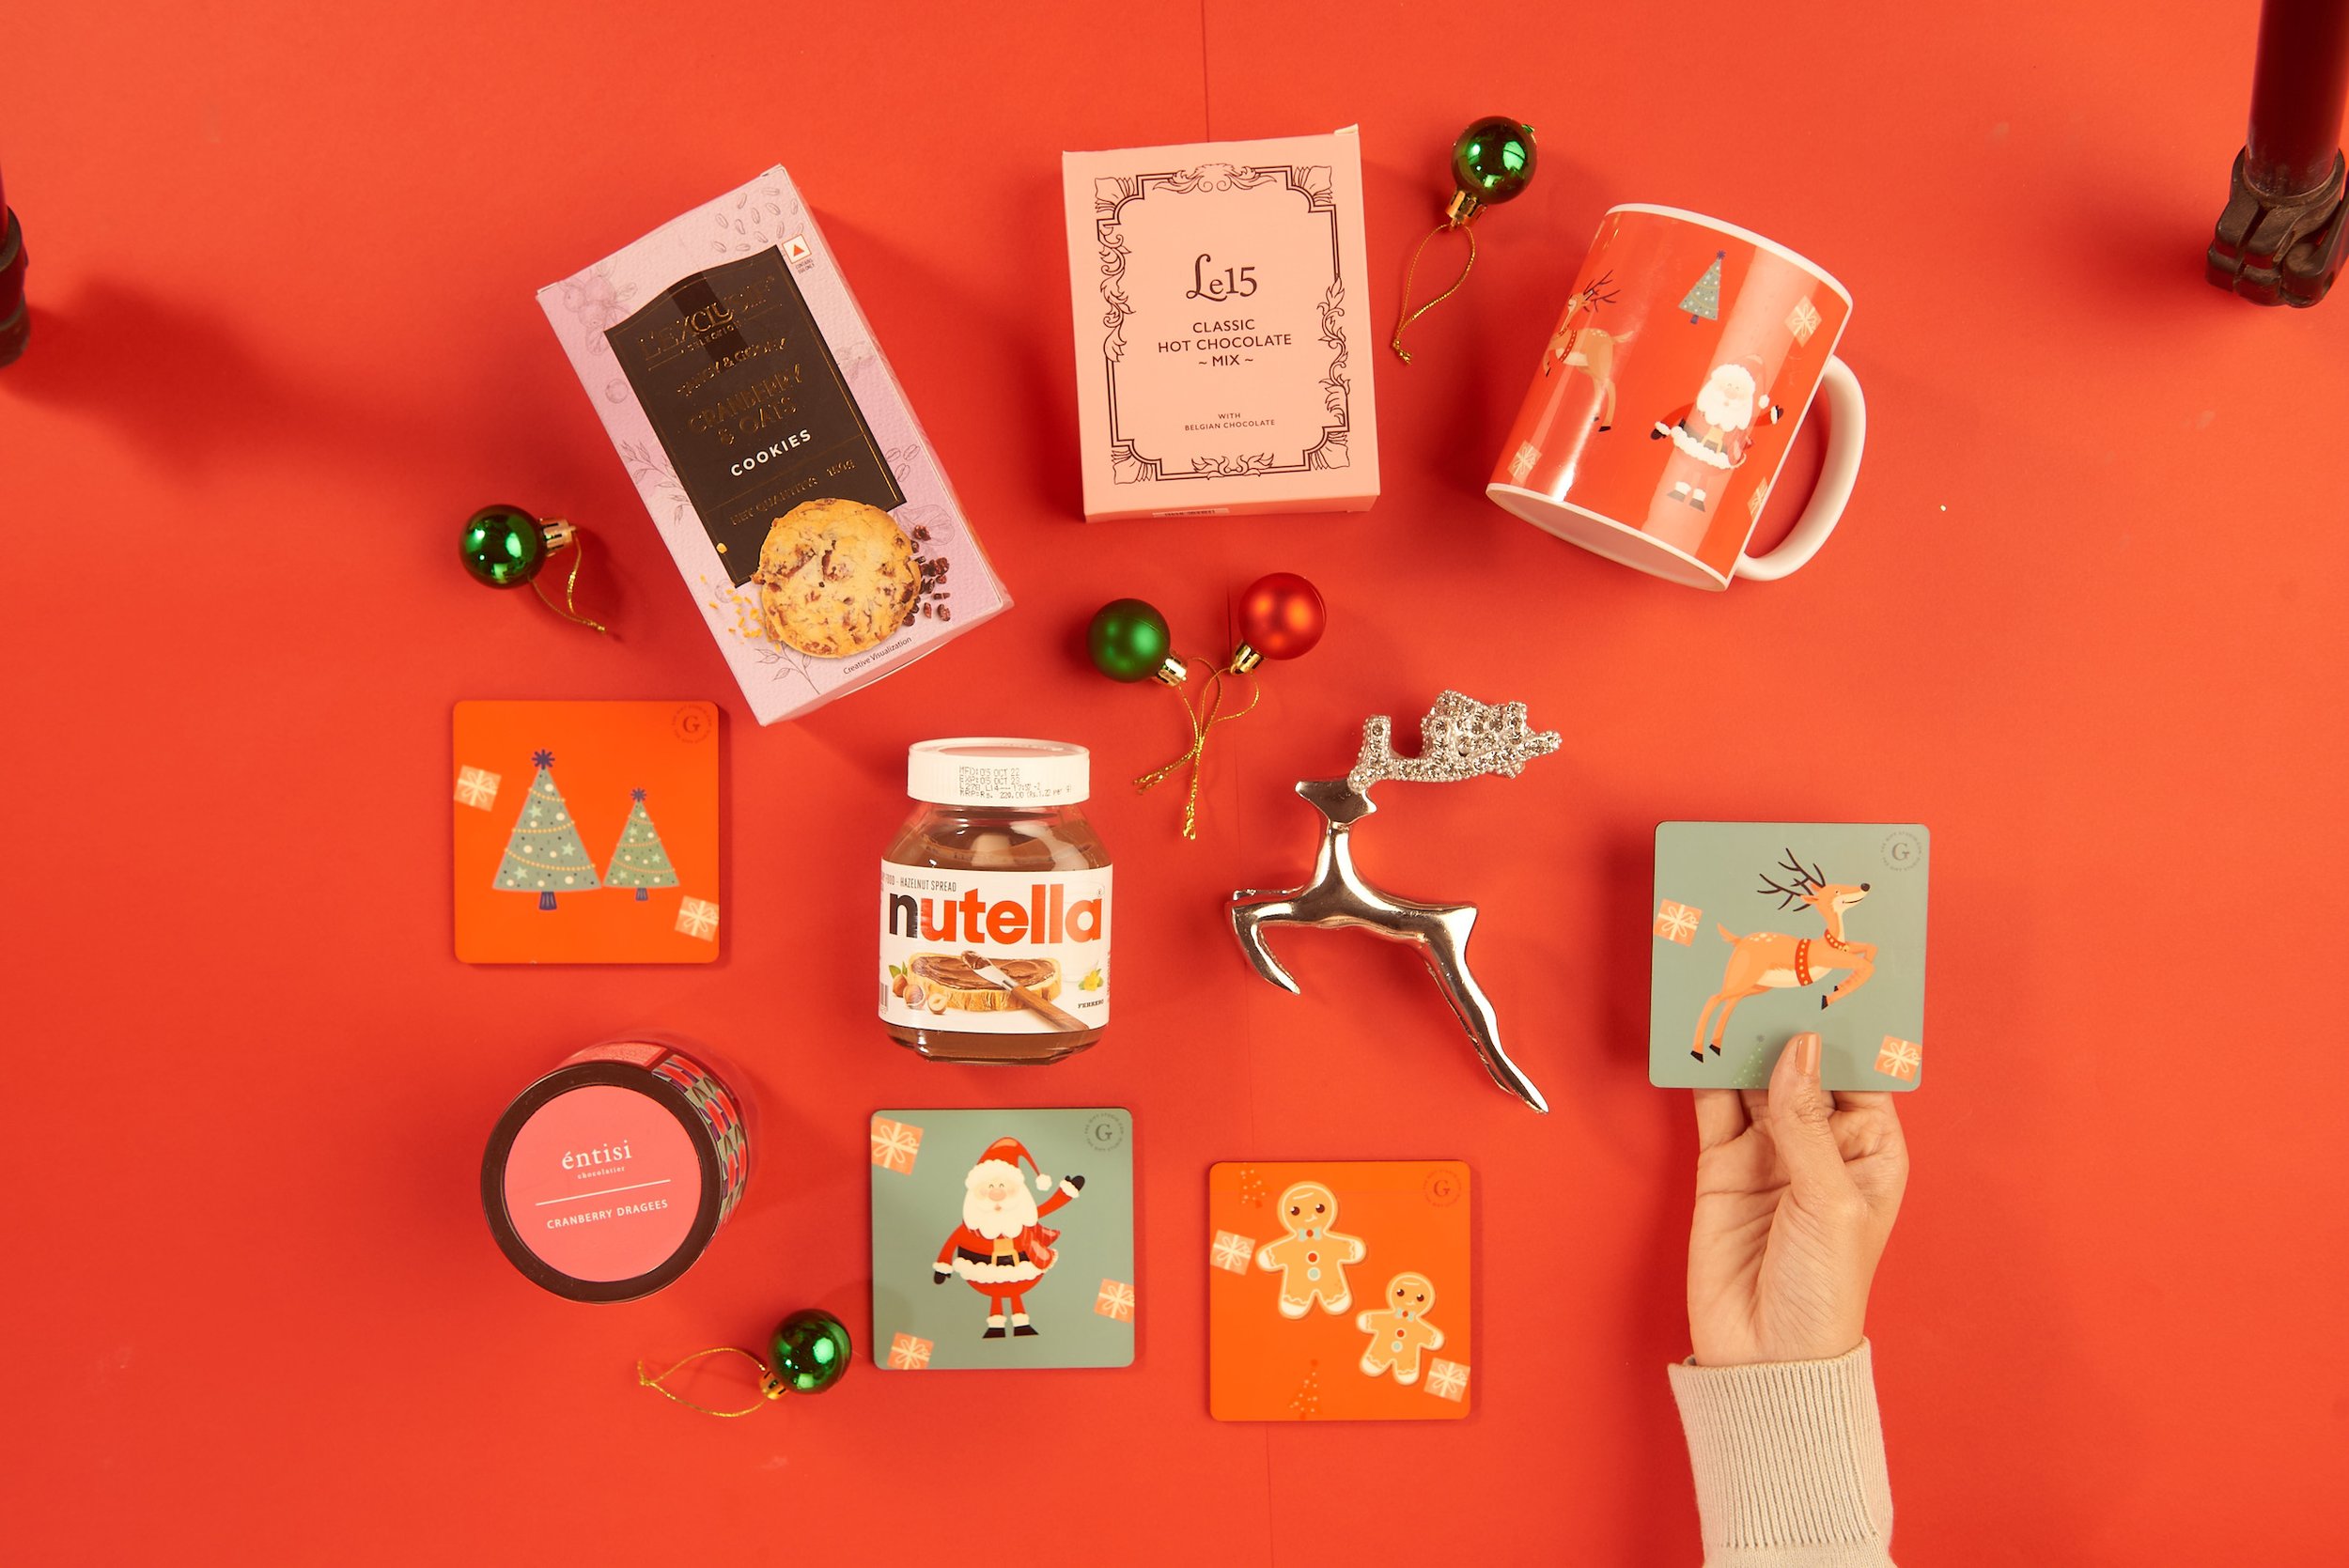 Celebrate Christmas Cheer with 'The Gift Studio' this Holiday